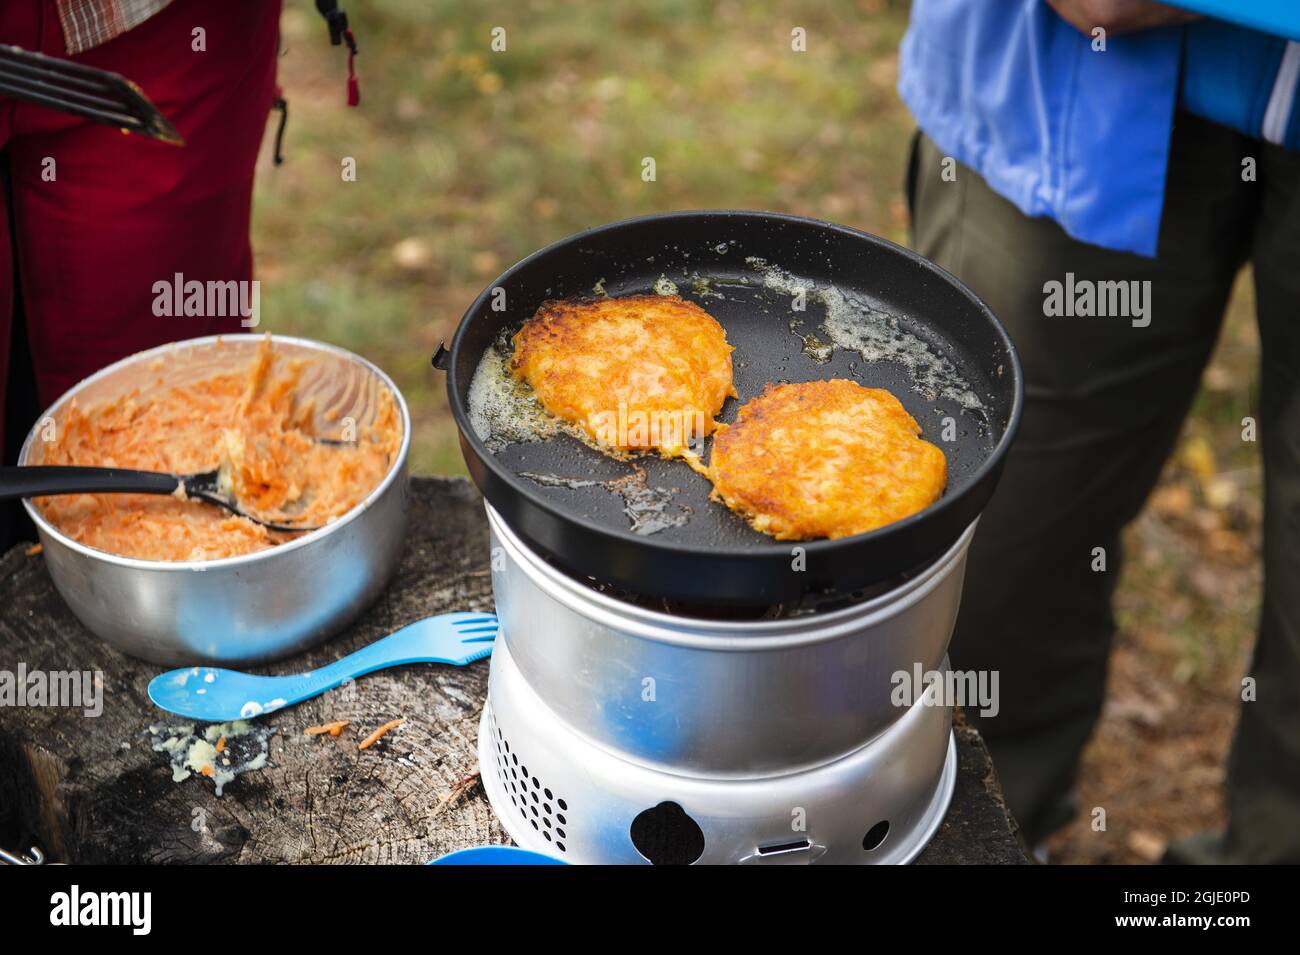 BES Keizer wij Cooking food outdoors on a Trangia camping stove Photo Anna Hallams / TT /  code 76143 Stock Photo - Alamy